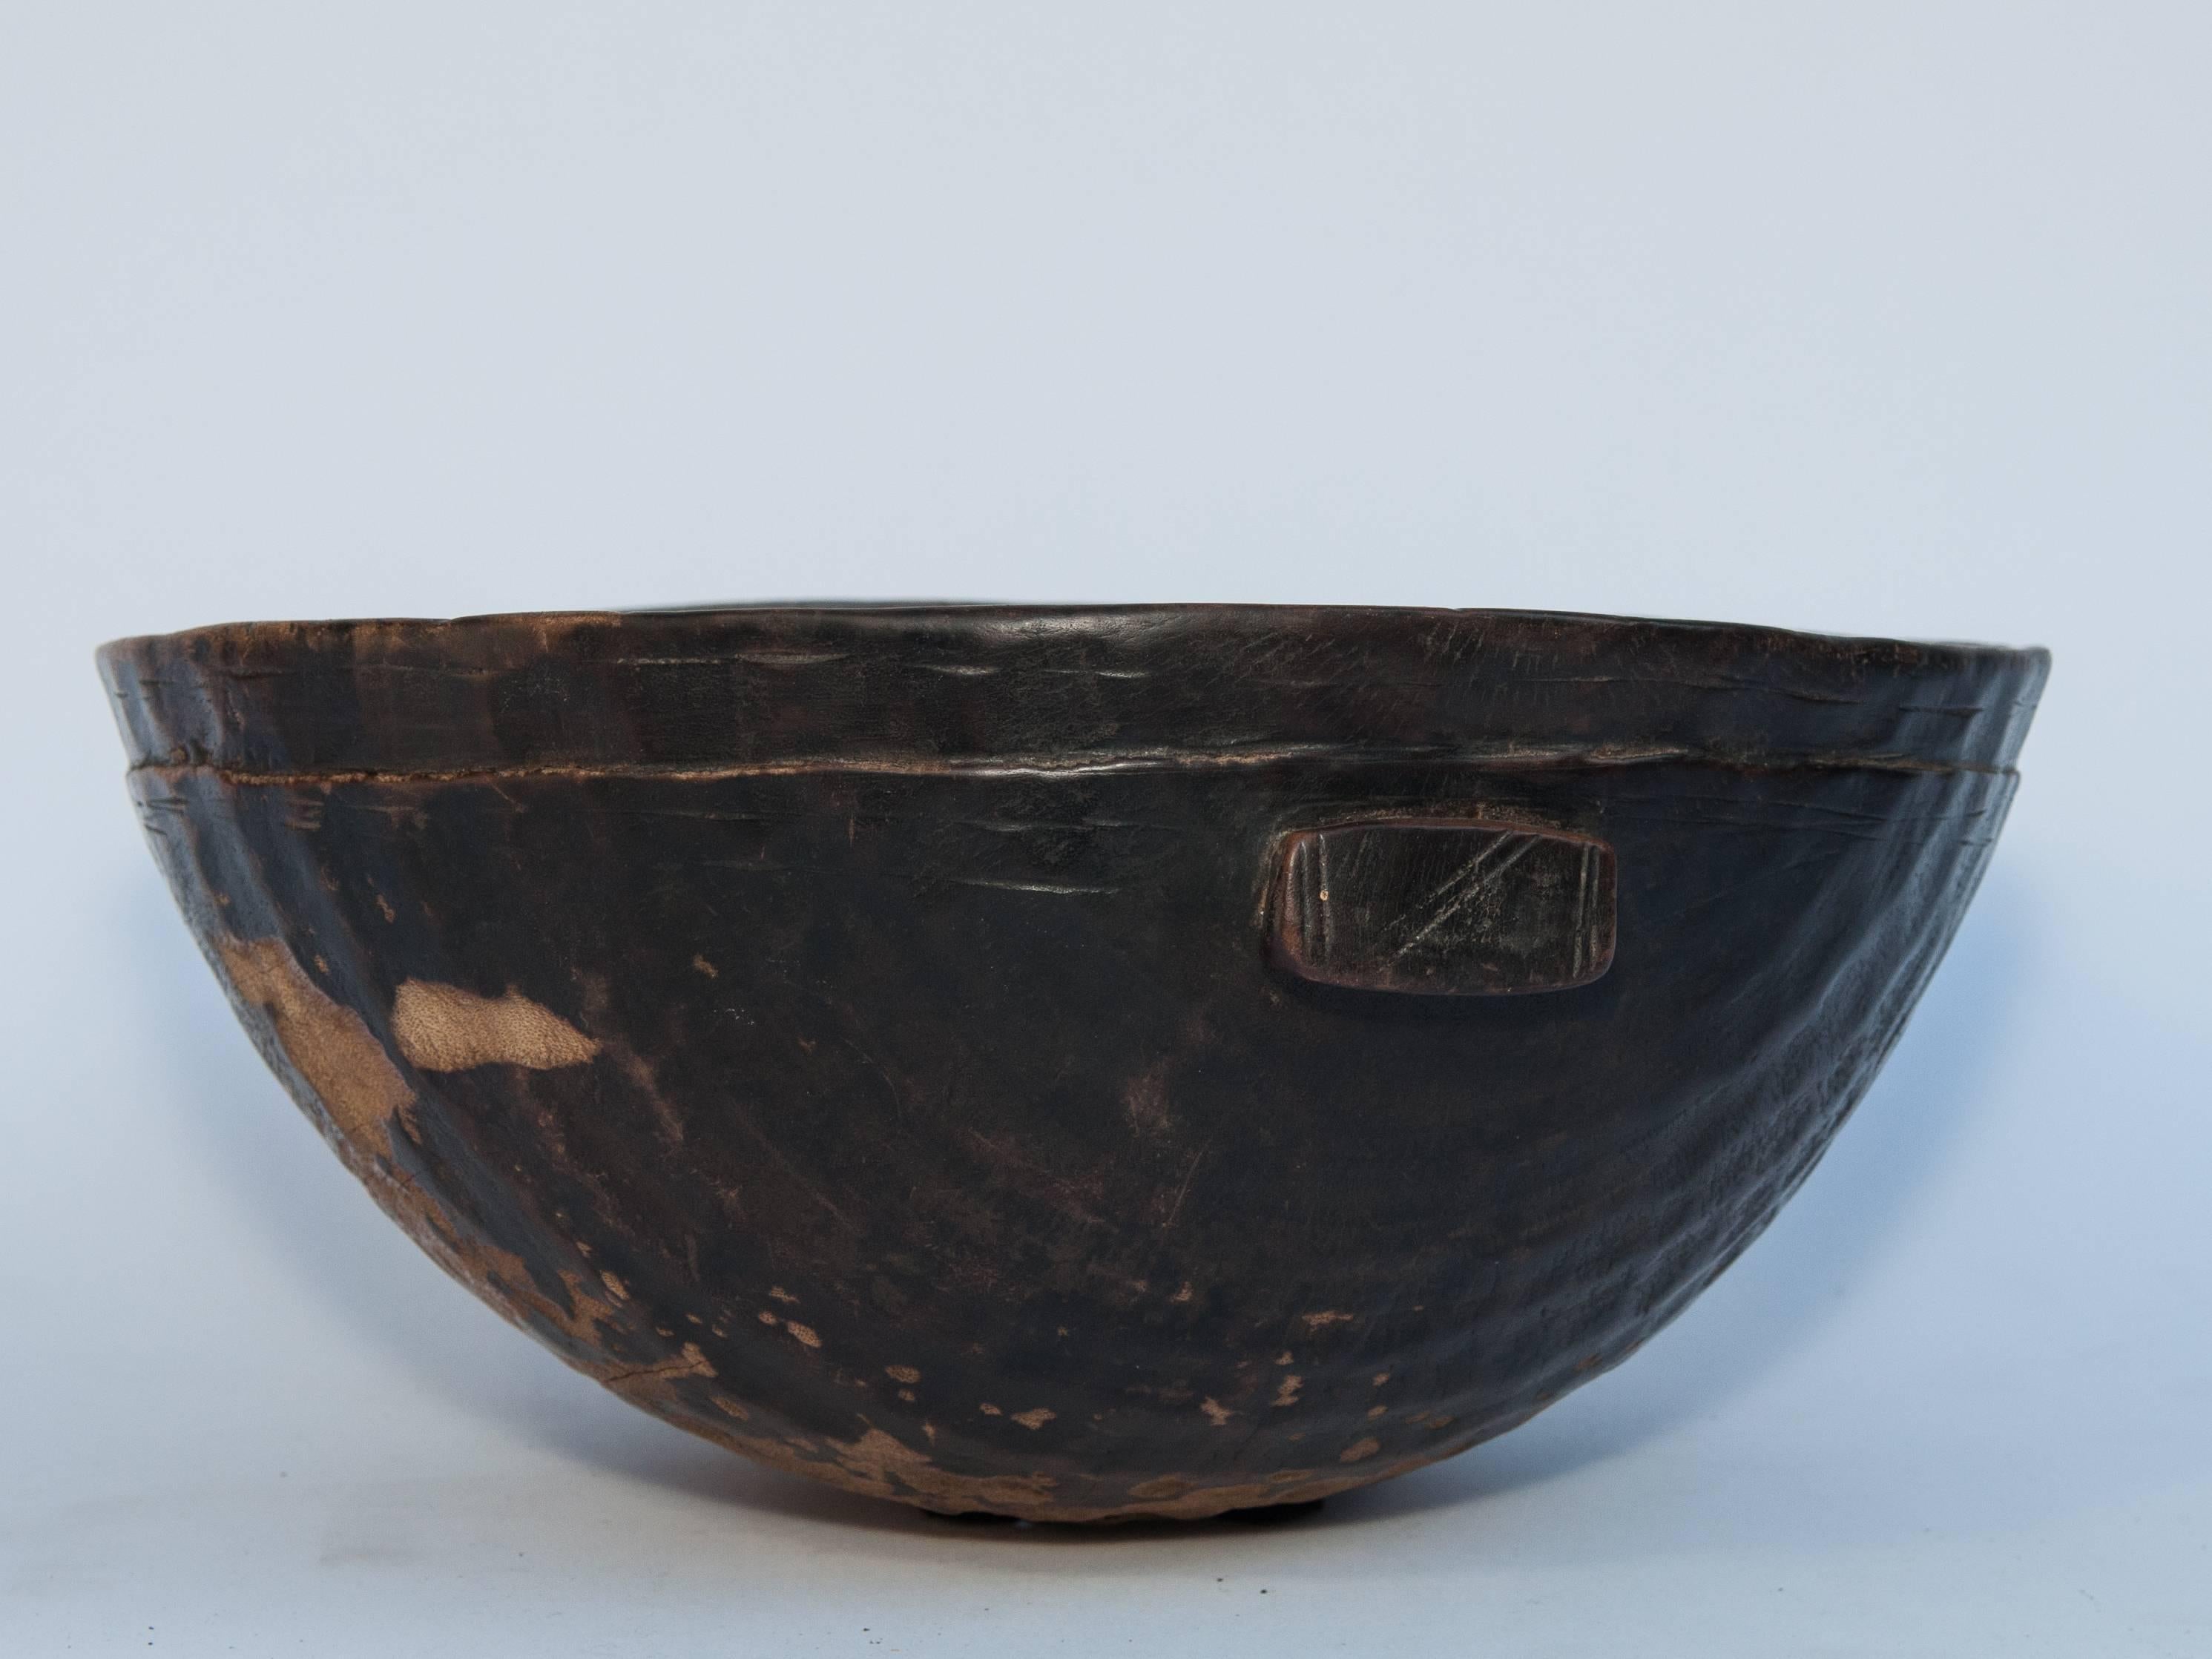 Tribal wooden bowl. Handhewn, from Mali, mid-20th century.
Offered by Bruce Hughes.
This rustic wooden bowl was fashioned by hand using very basic tools. It was used as a food or grain bowl. Eroded areas on the interior and exterior of the bowl